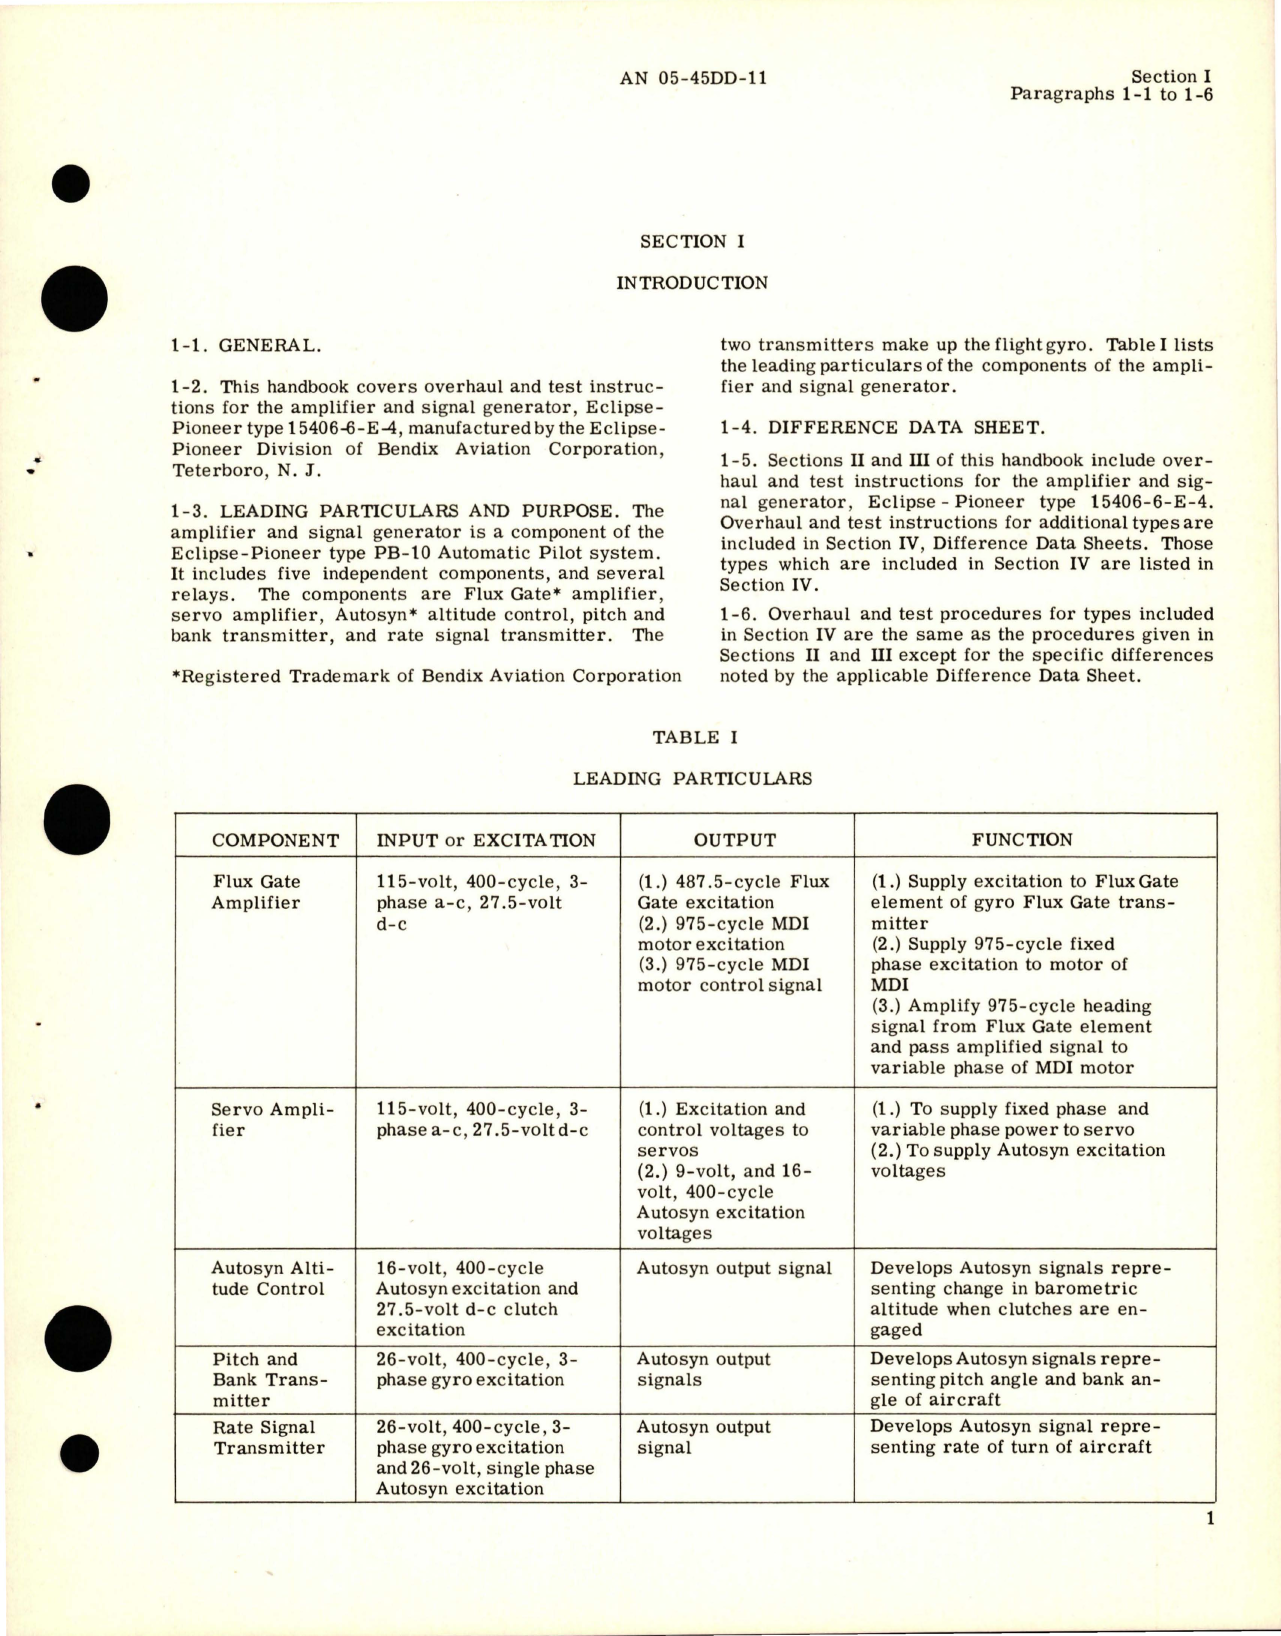 Sample page 7 from AirCorps Library document: Overhaul Instructions for Amplifier and Signal Generator - Parts 15406-6-C-4, 15406-6-D-4, 15406-6-E-4 